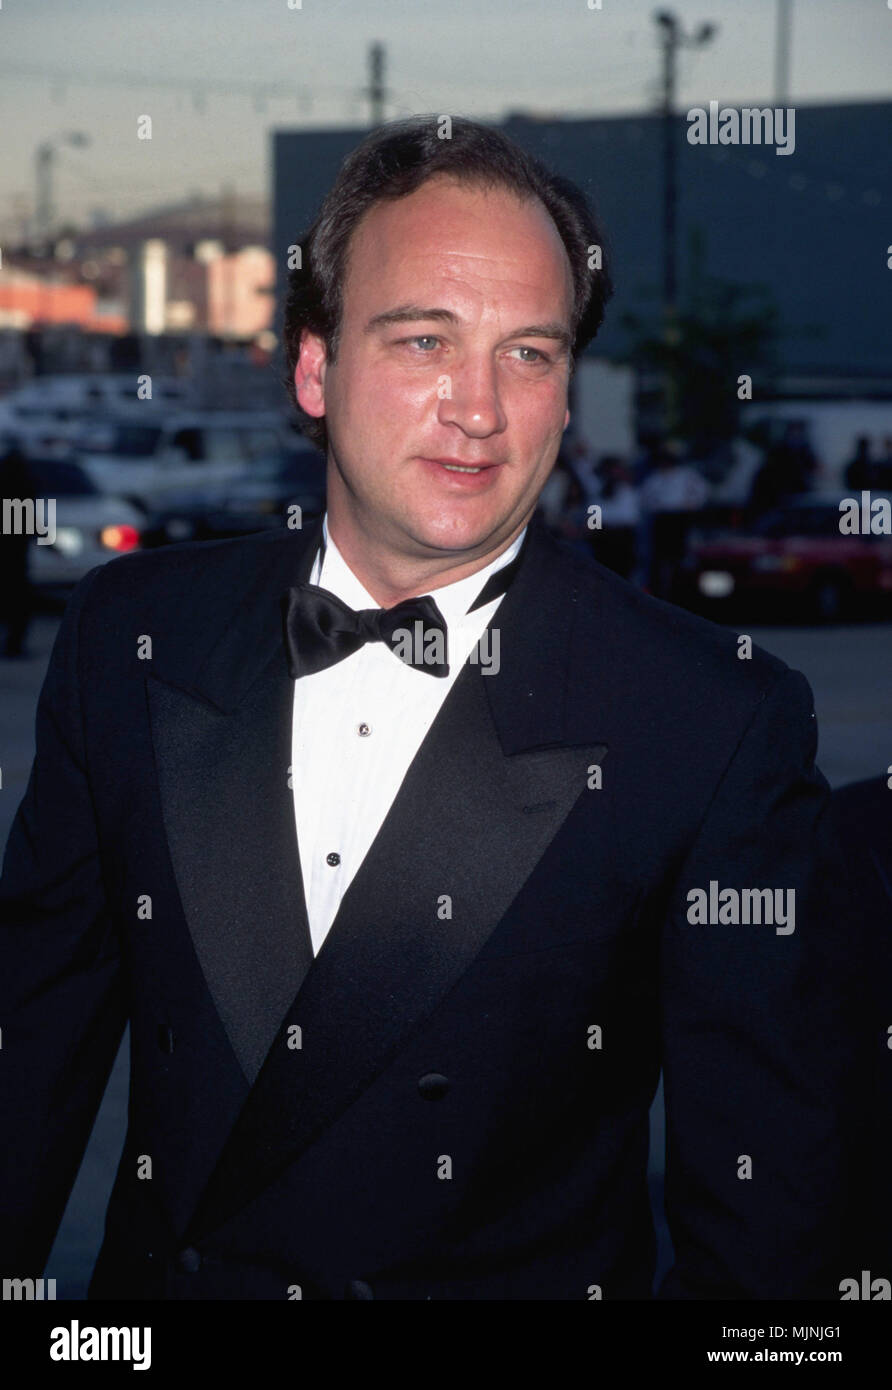 March 1996, Hollywood, Los Angeles, California, USA --- Original caption: 3/1996-Los Angeles, CA: Portrait of Jim Belushi arriving at the Pantages Theater for the Blockbuster Awards. He is shown waist-up, wearing a tuxedo. --- ' Tsuni / - 'Jim Belushi  Jim Belushi Stock Photo